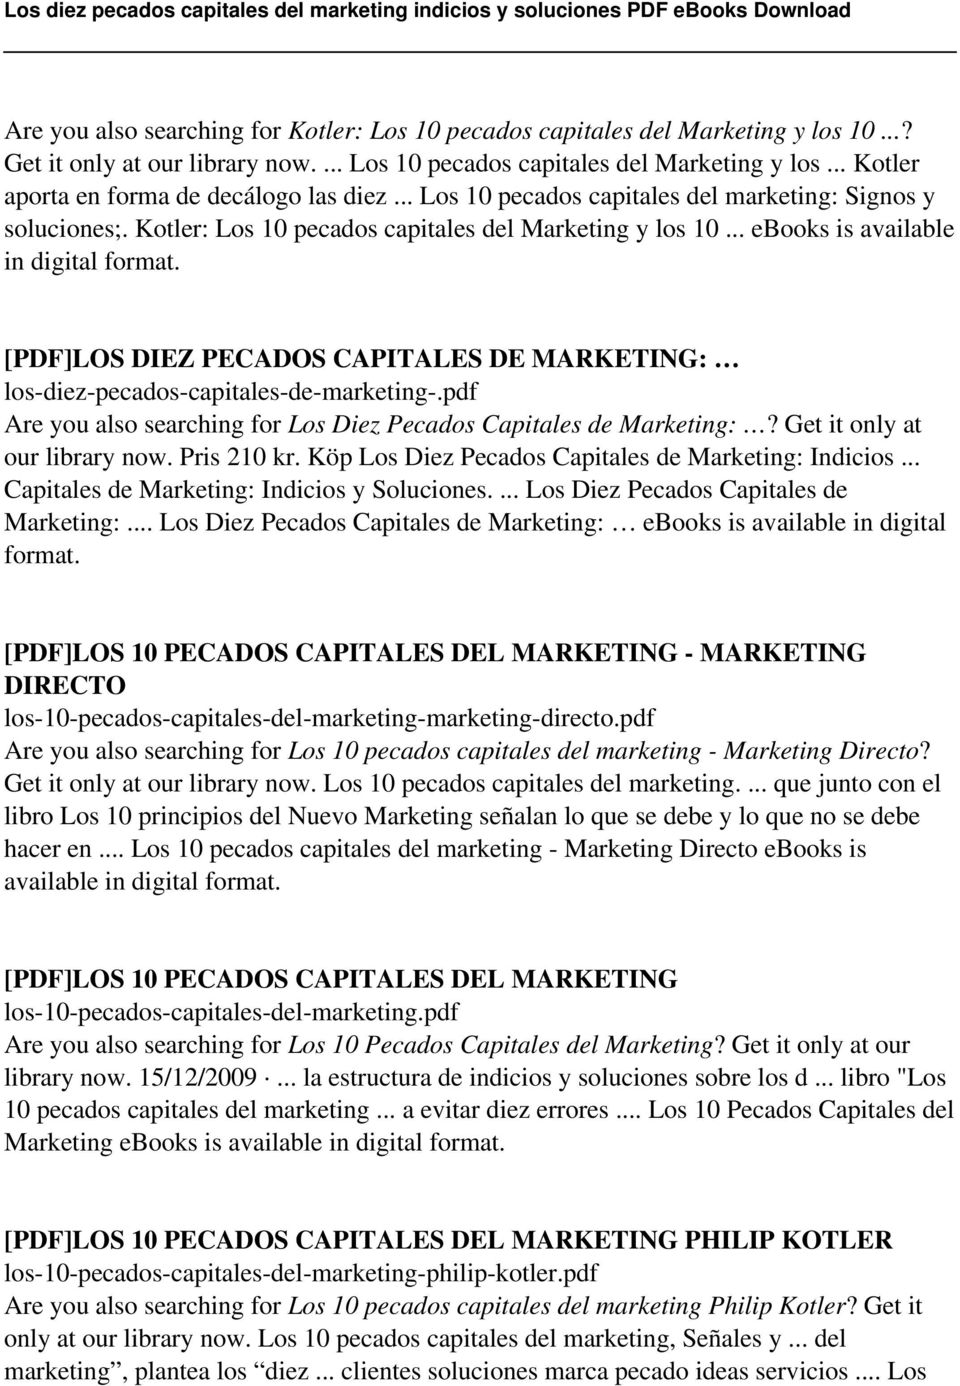 [PDF]LOS DIEZ PECADOS CAPITALES DE MARKETING: los-diez-pecados-capitales-de-marketing-.pdf Are you also searching for Los Diez Pecados Capitales de Marketing:? Get it only at our library now.